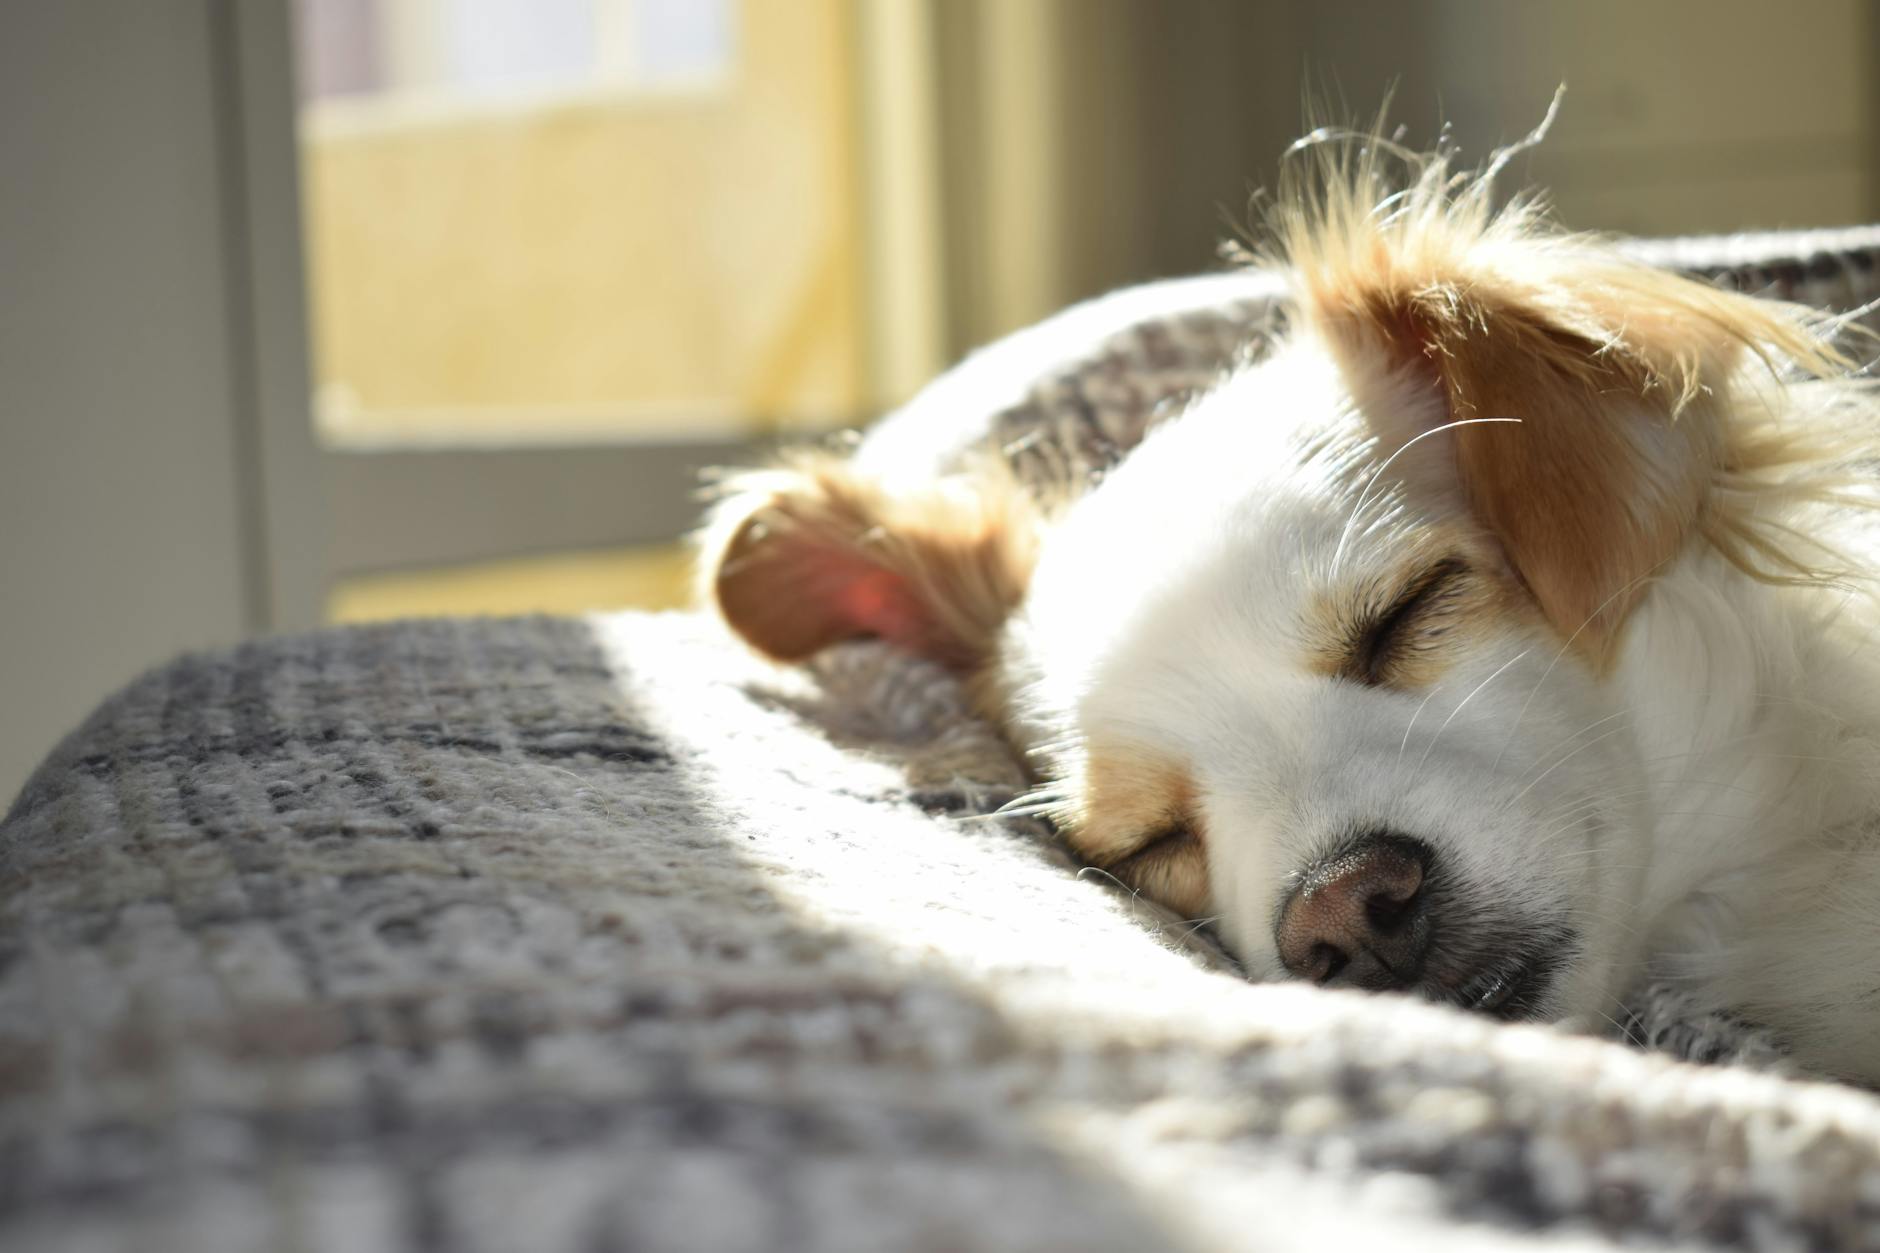 Closeup Photography of Adult Short-coated Tan and White Dog Sleeping on Gray Textile at Daytime